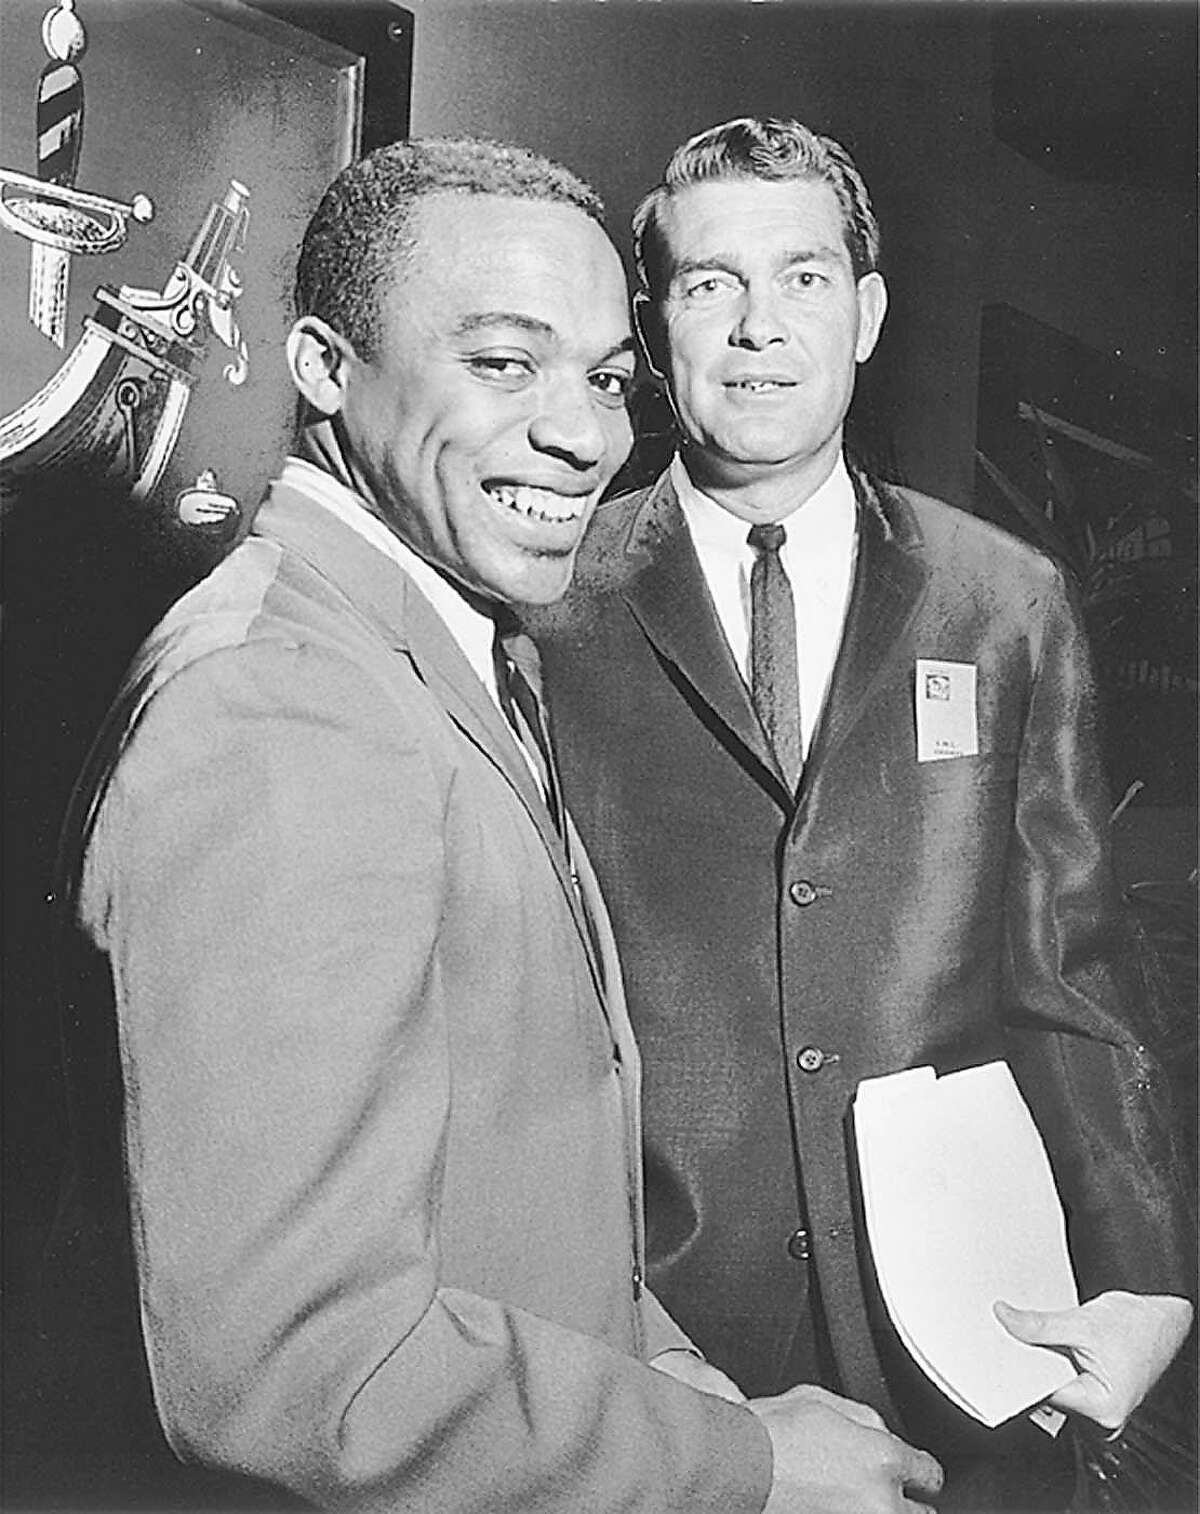 ** ADVANCE FOR WEEKEND, AUG. 7 - 8 -- FILE ** Jerry LeVias, left, poses with Southern Methodist University coach Hayden Fry after being named Southwest Conference Player of the Year in 1968. LeVias and Fry are scheduled to be inducted this month into the College Football Hall of Fame. (AP Photo/Dallas Morning News, File)